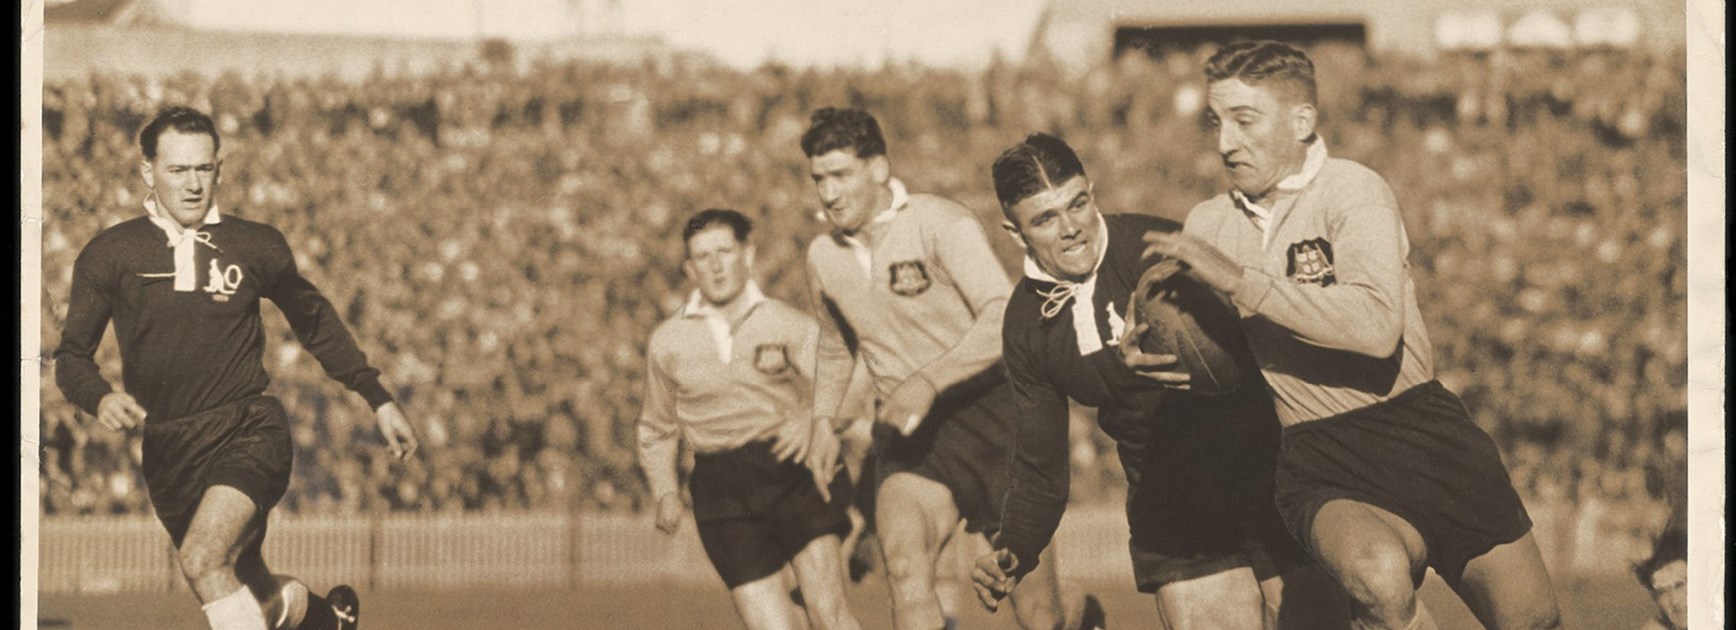 Origin ate rugby league: Tracing the roots of a great interstate rivalry